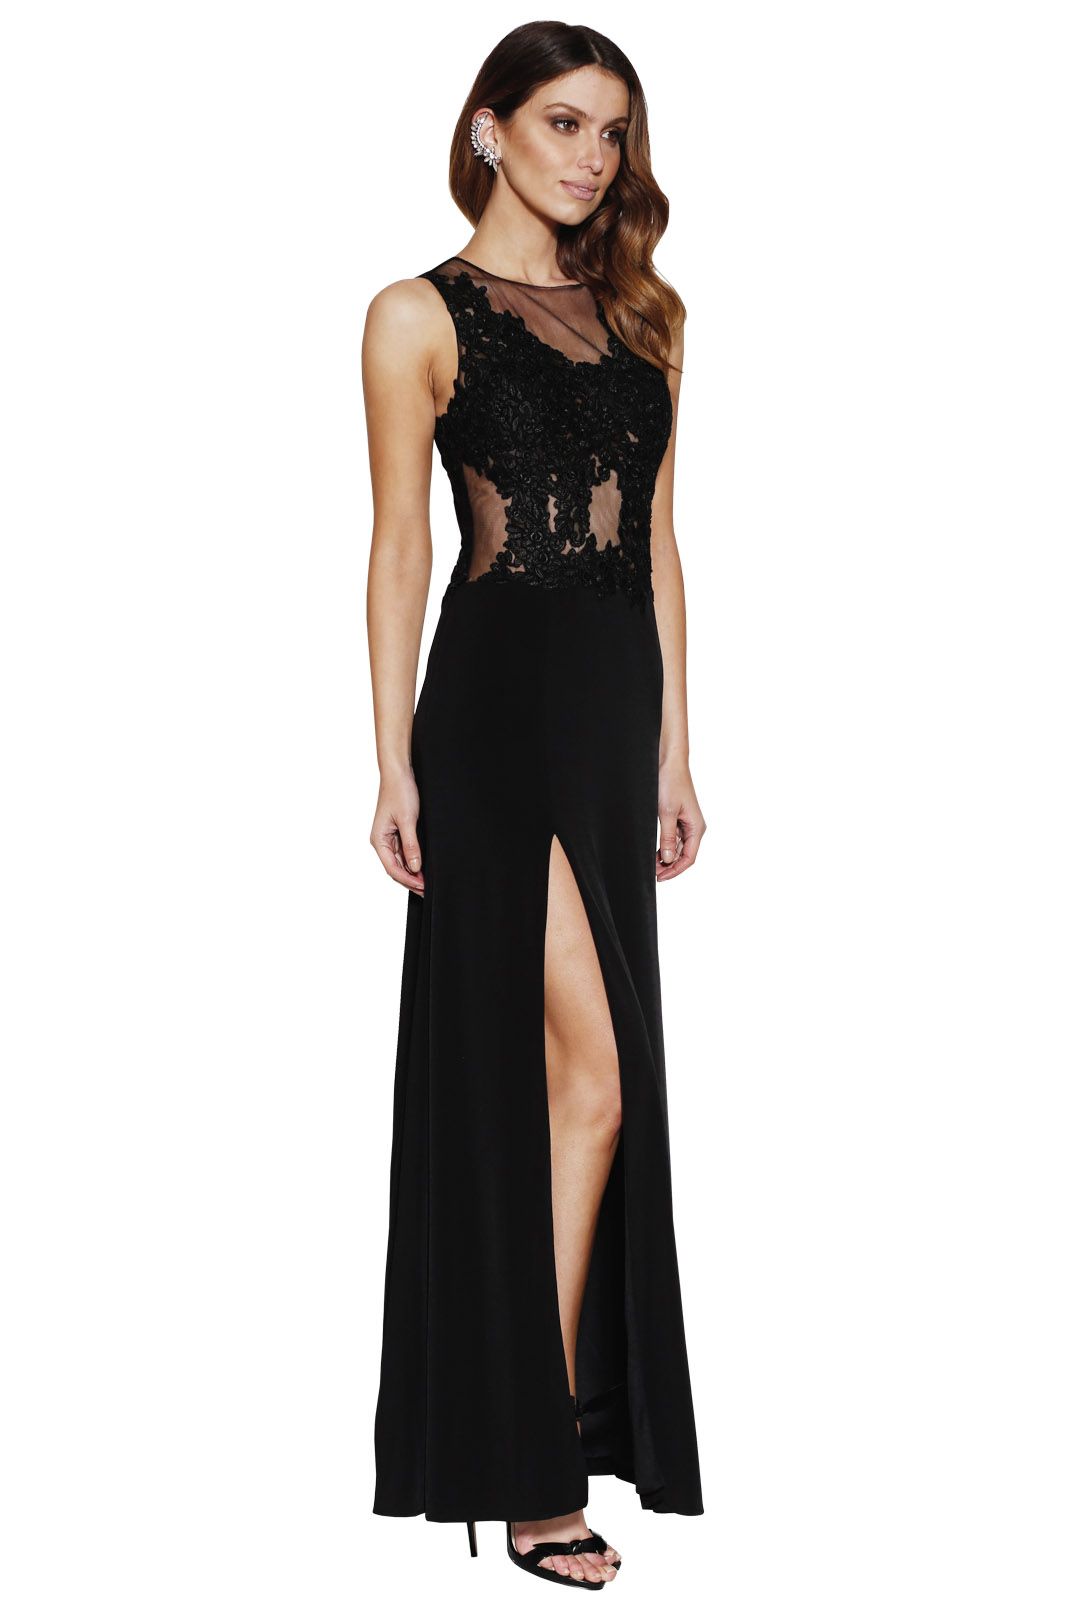 Grace and Hart - Starlet Gown Black - Side